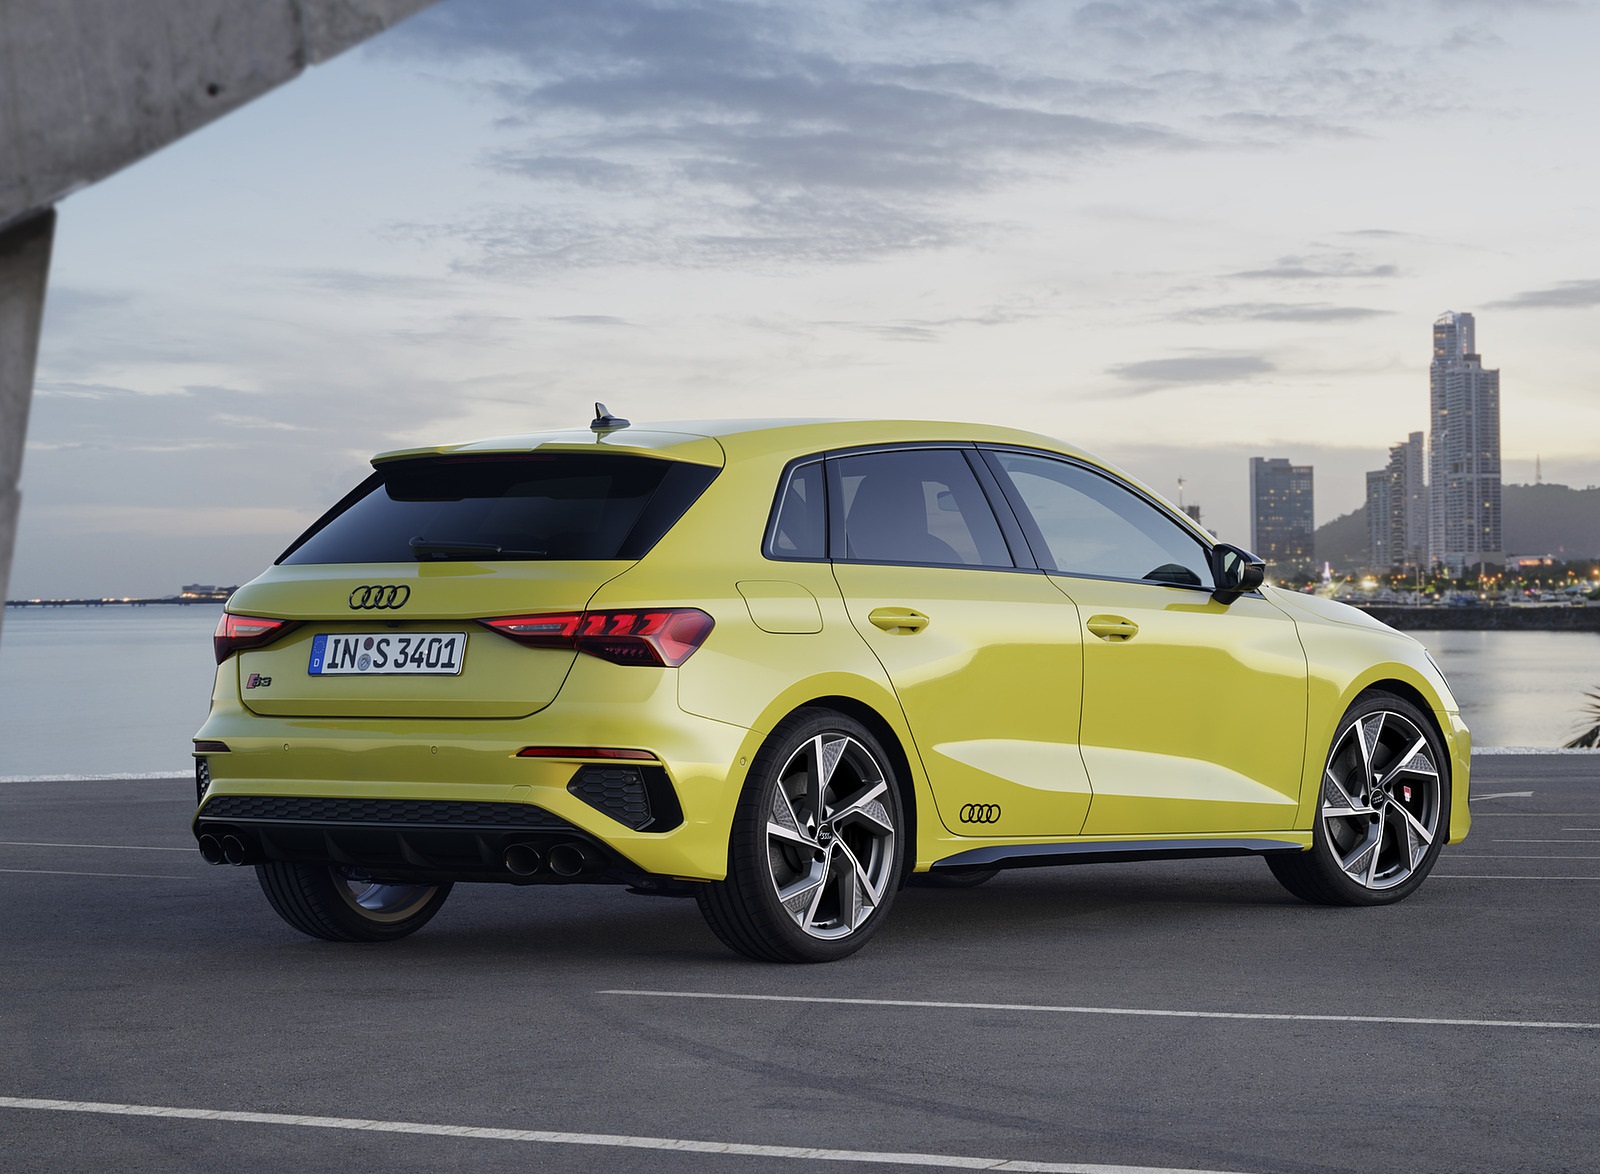 2021 Audi S3 Sportback (Color: Python Yellow) Rear Three-Quarter Wallpapers #15 of 37